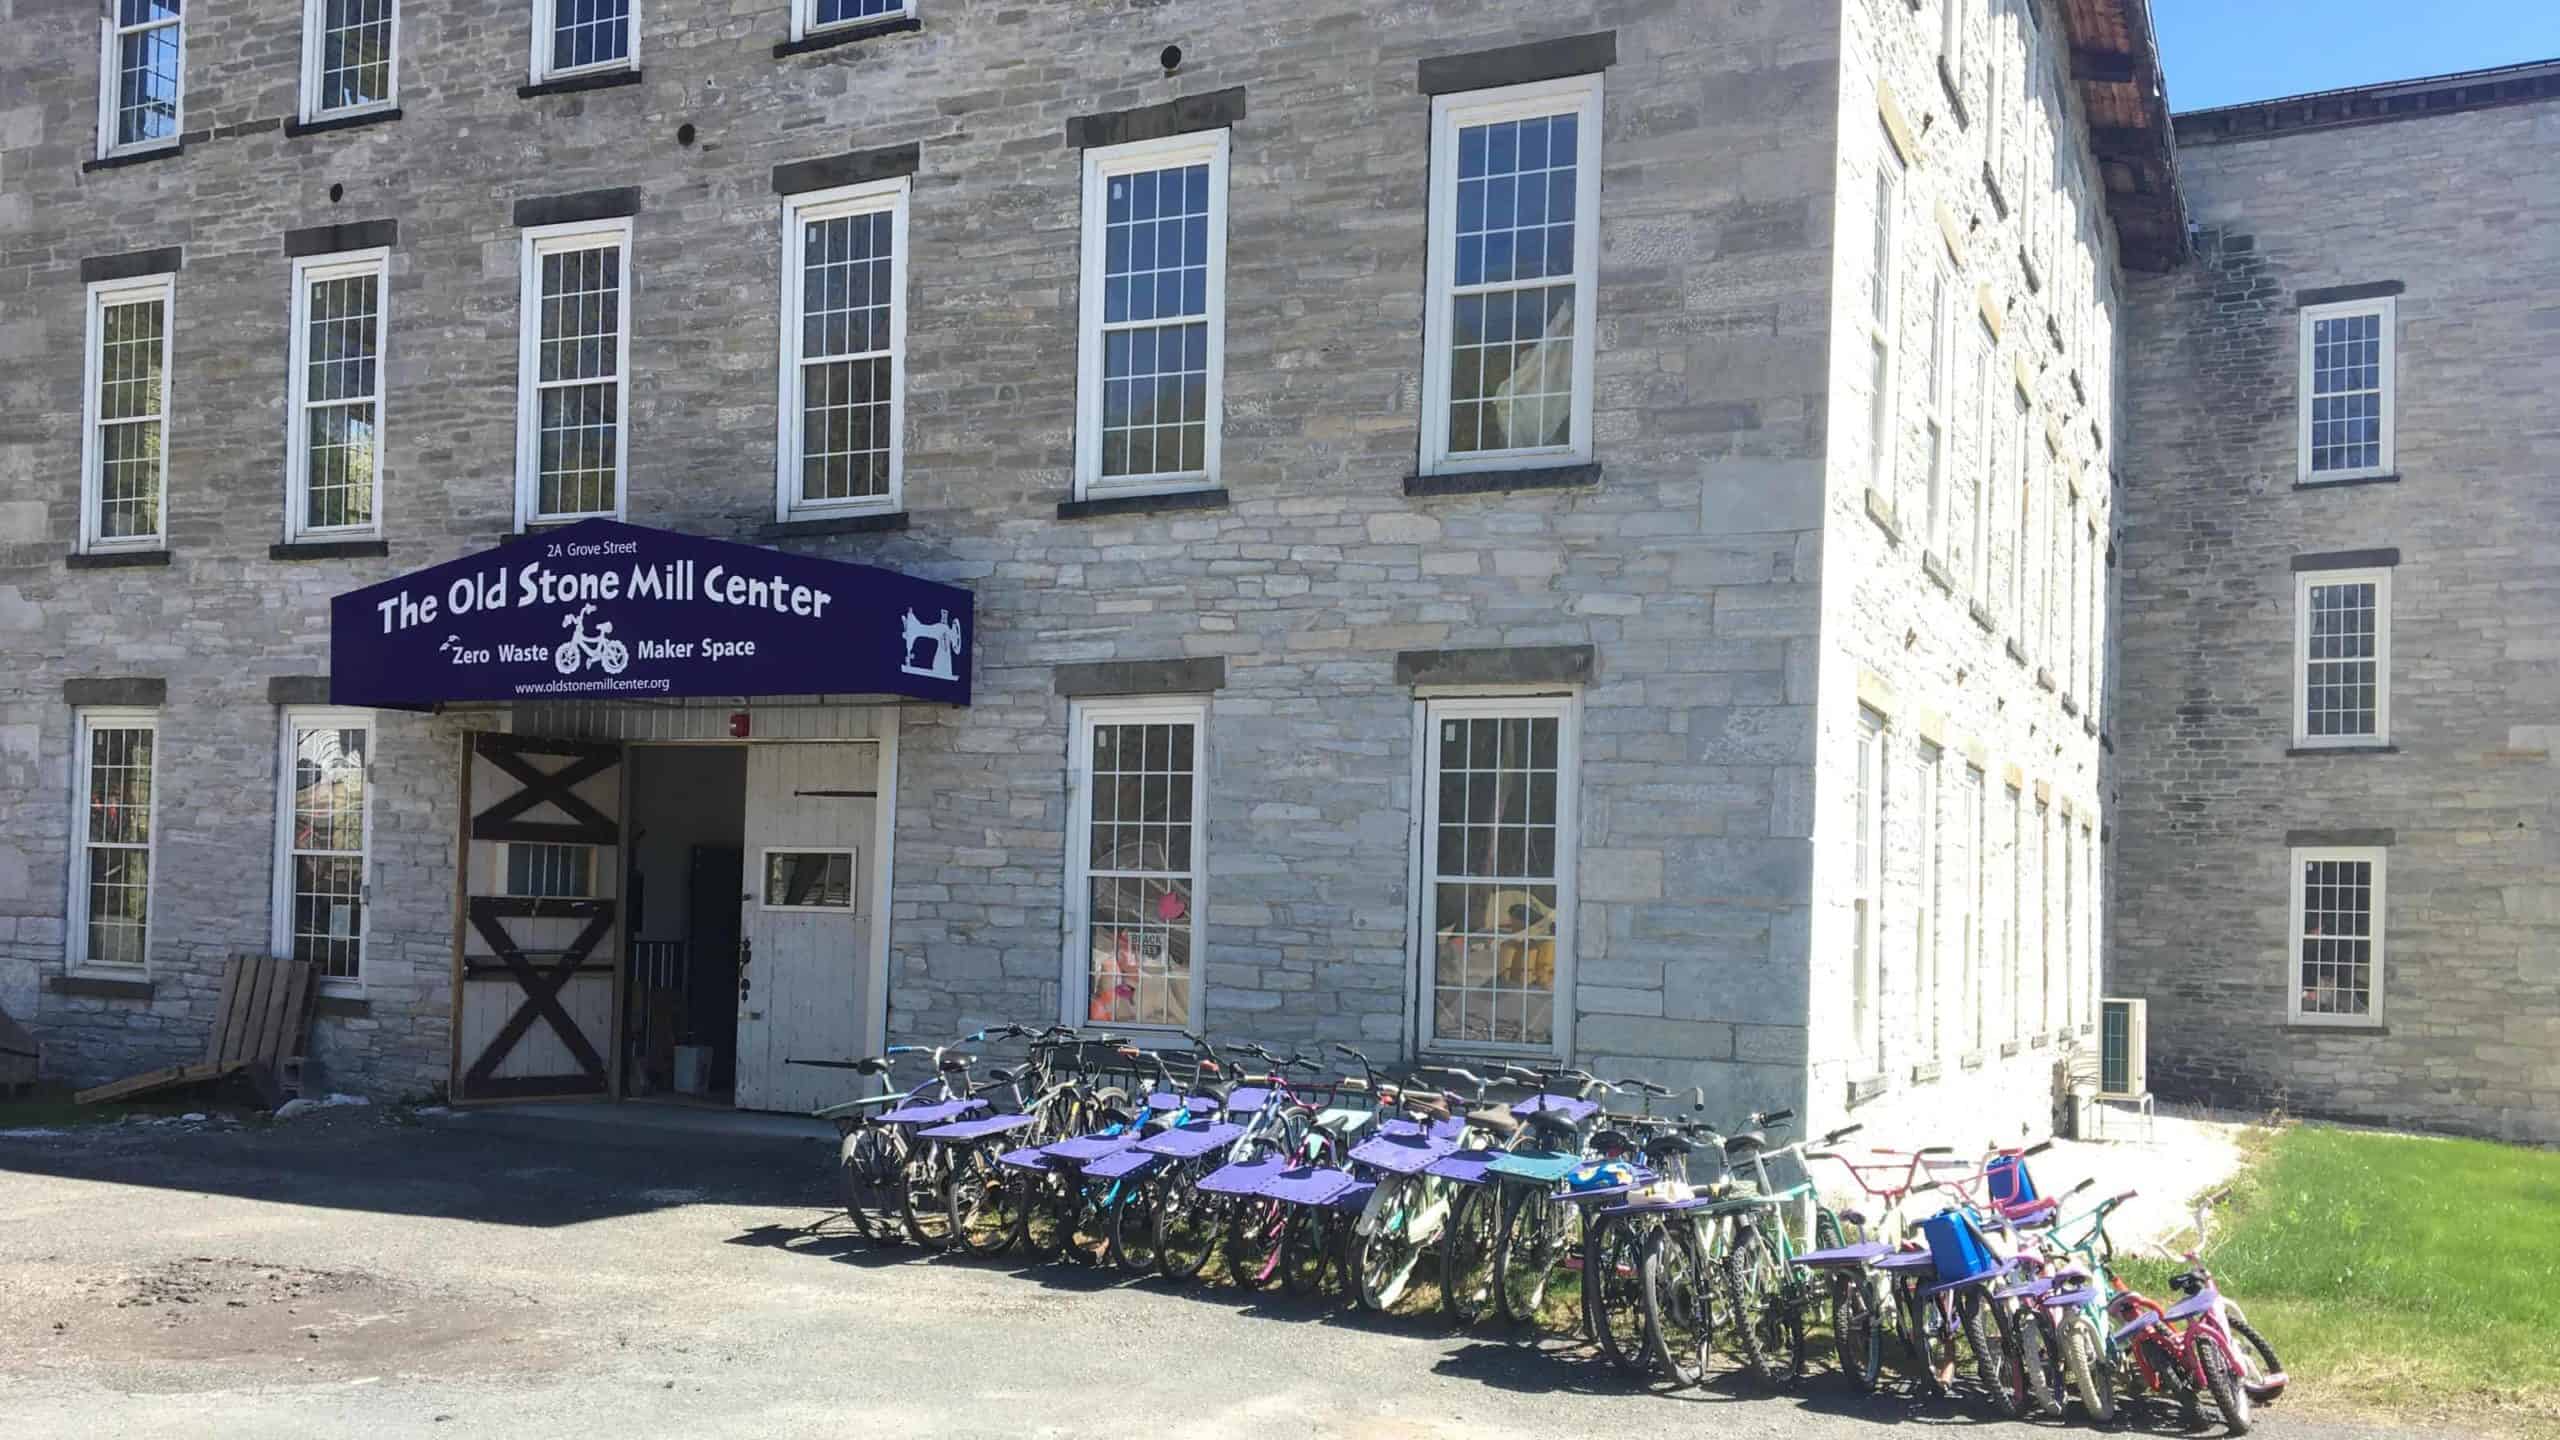 The Old Stone Mill Center in Adams, a zero-waste maker space, restores bikes to donate and sell.